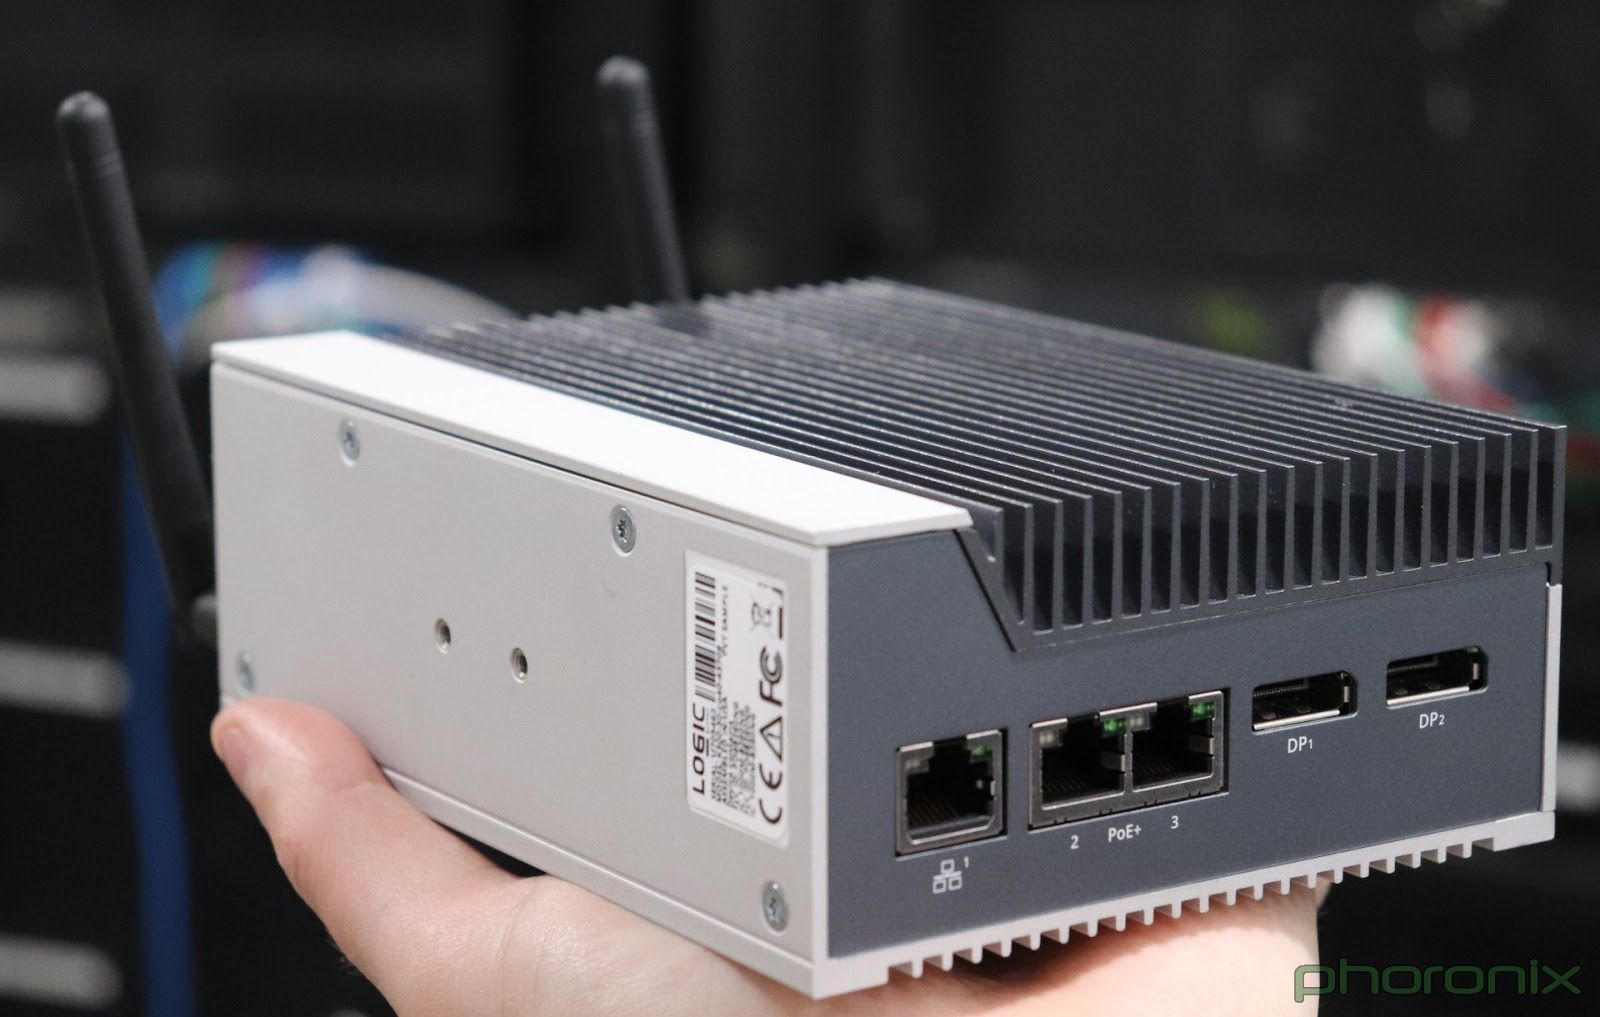 picture of the IPC, a K300, hand-sized aluminium casing with cooling fins and connectors for ethernet and monitores